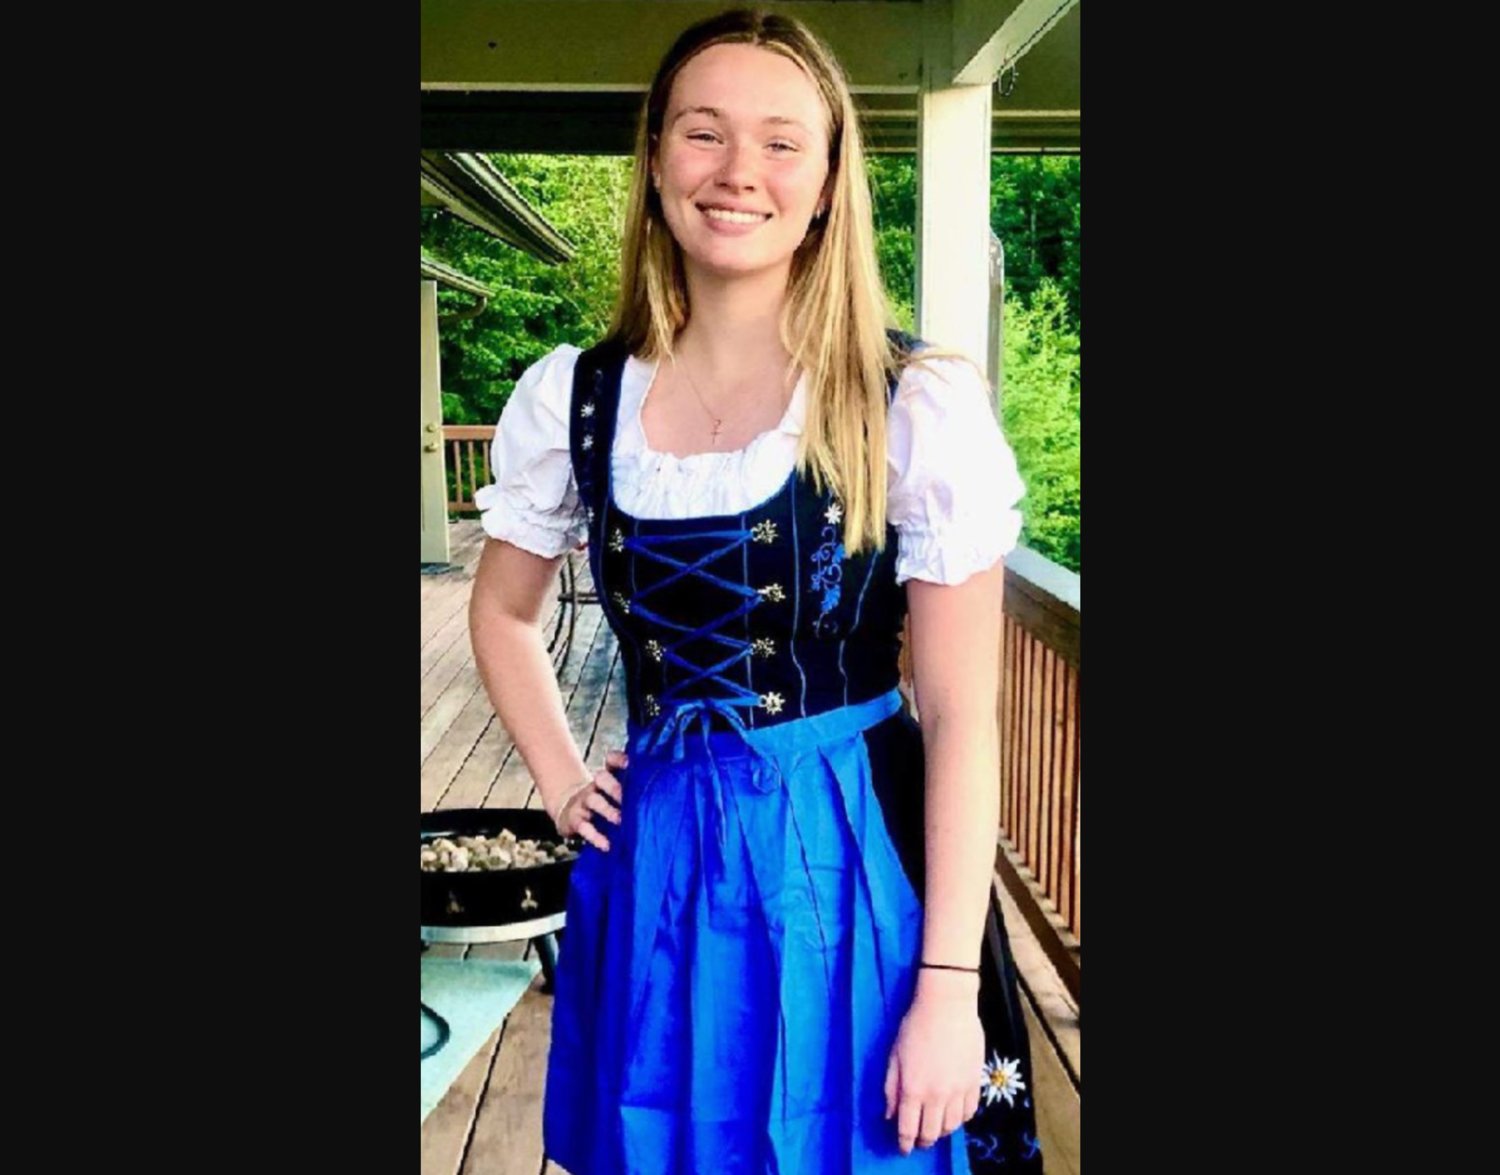 One candidate for the 2022 Oktoberfest Swiss Miss will be Grace Huber.